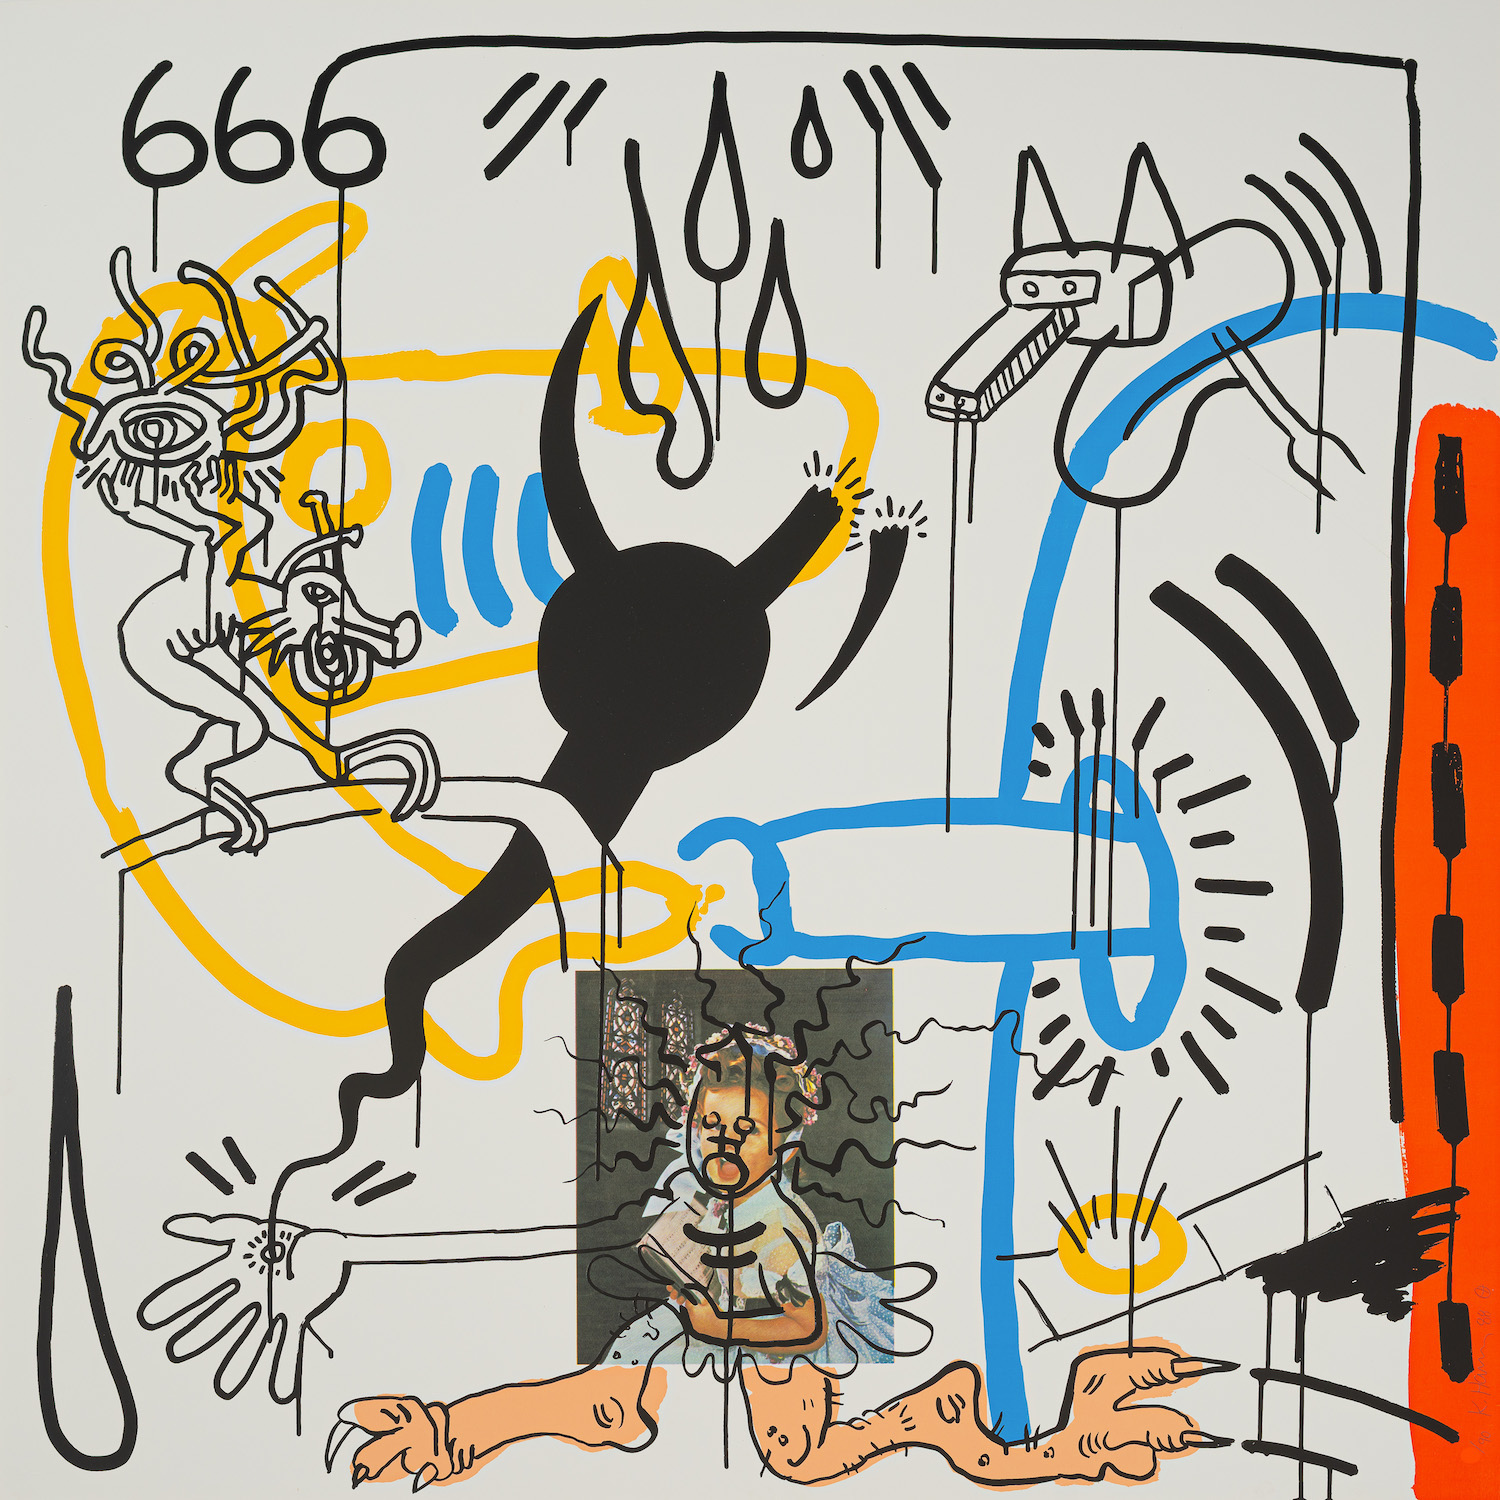 Apocalypse 8 by Keith Haring, basic scan.